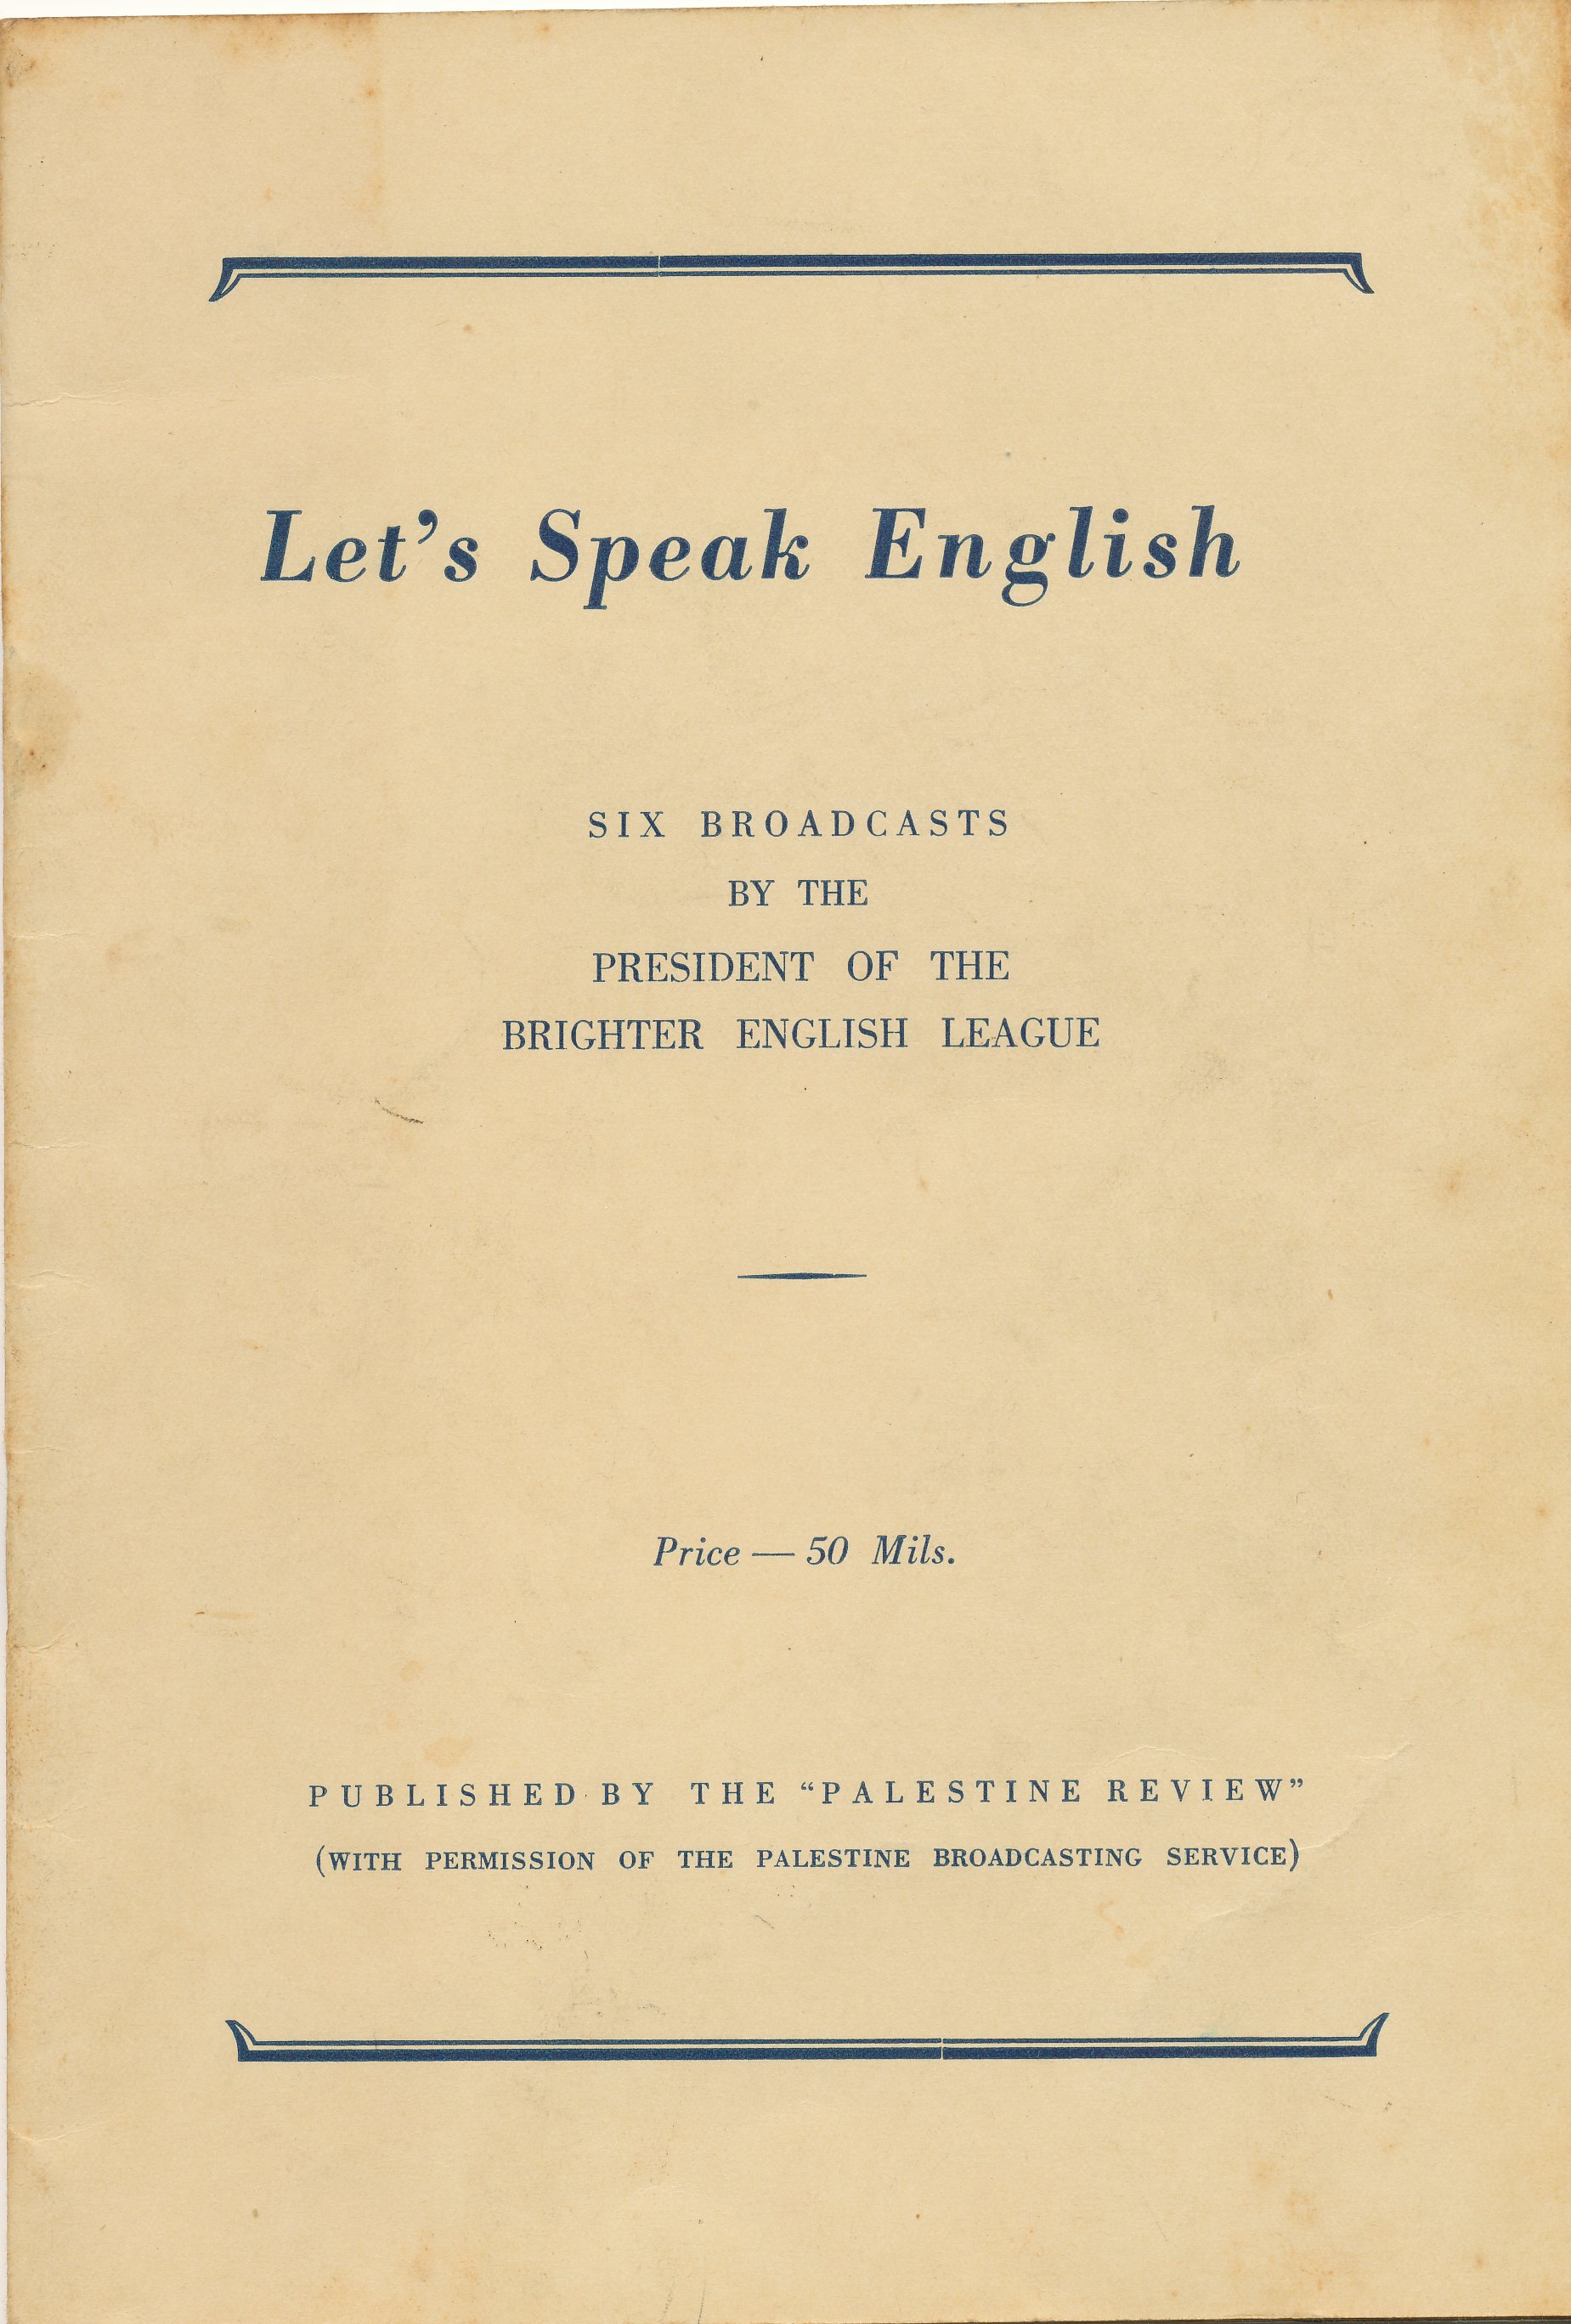 front cover of booklet Let's Speak English, by Brighter English League